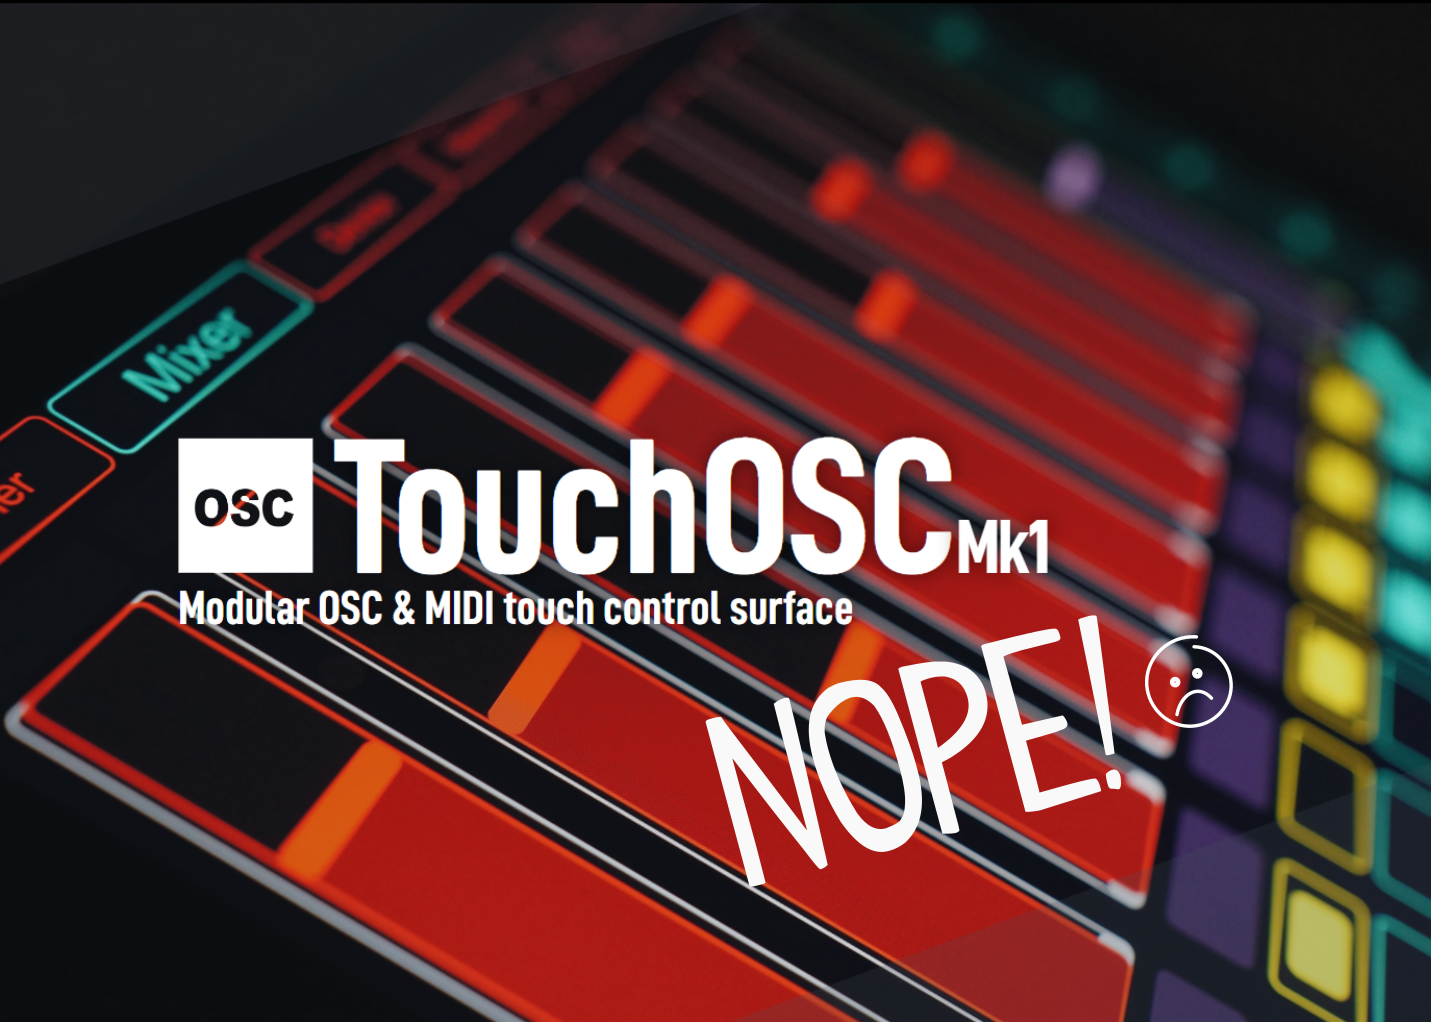 Novation CIrcuit Patch Editor will not work with touchOSC mk1